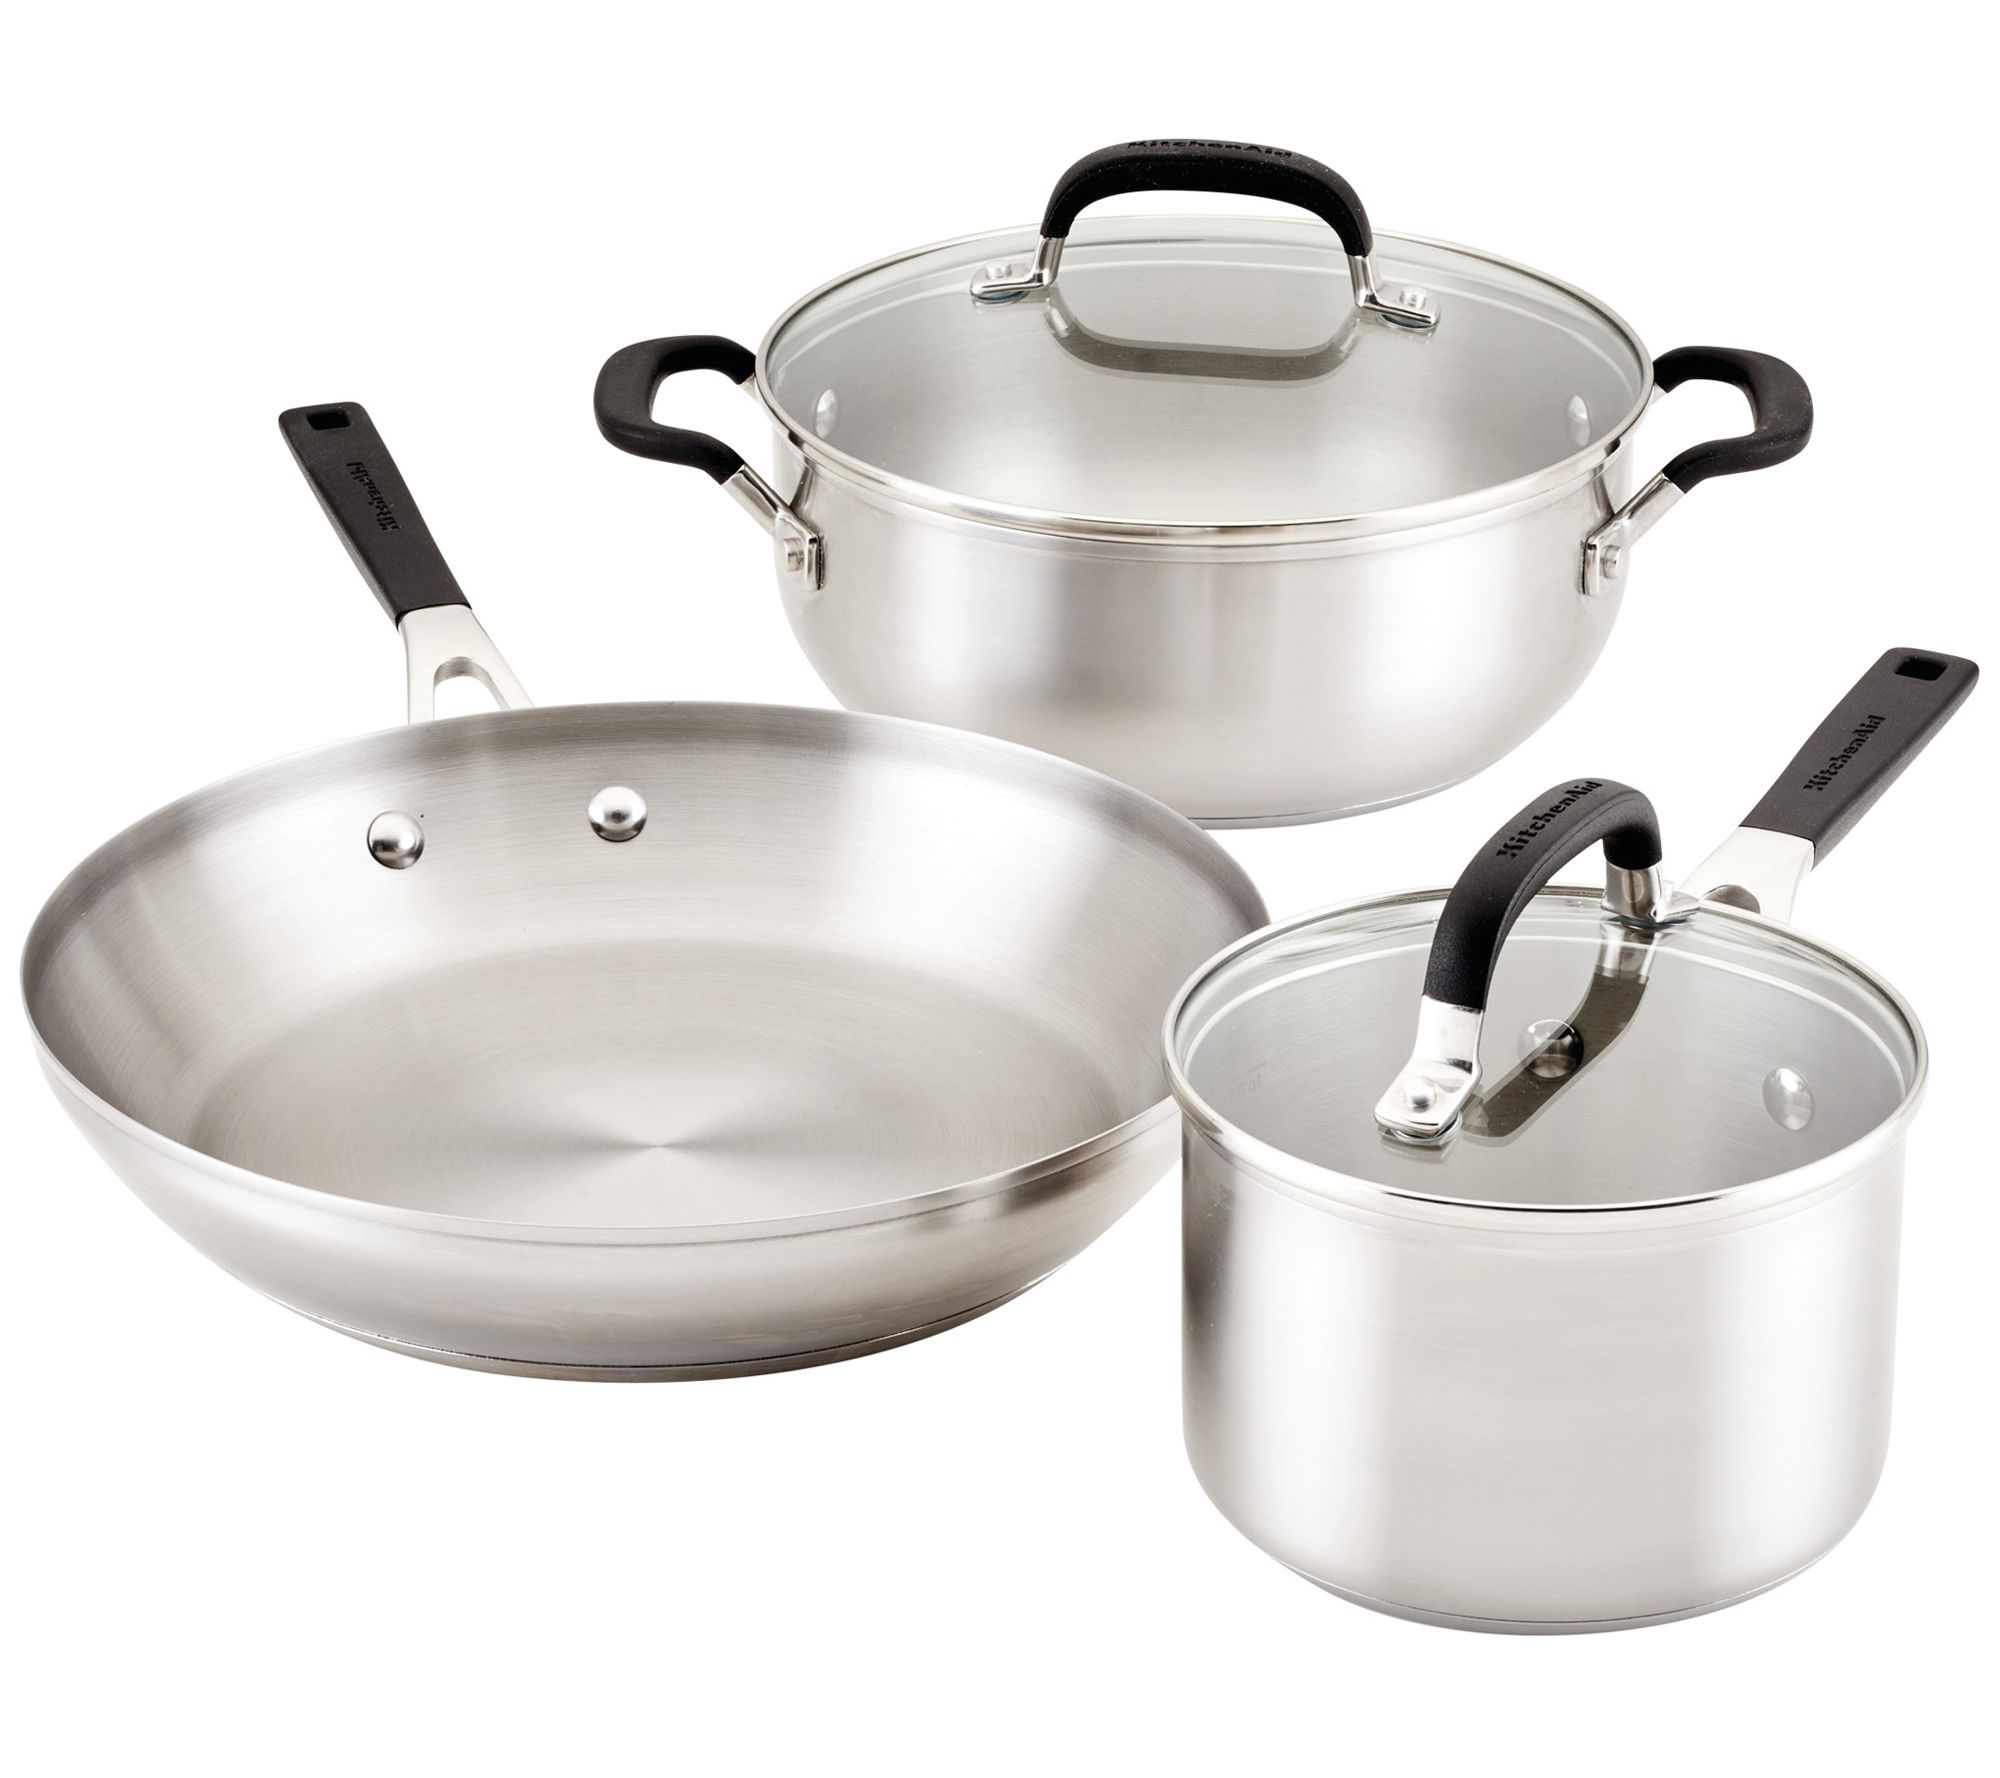 KitchenAid Stainless Steel Cookware 5pc Set 